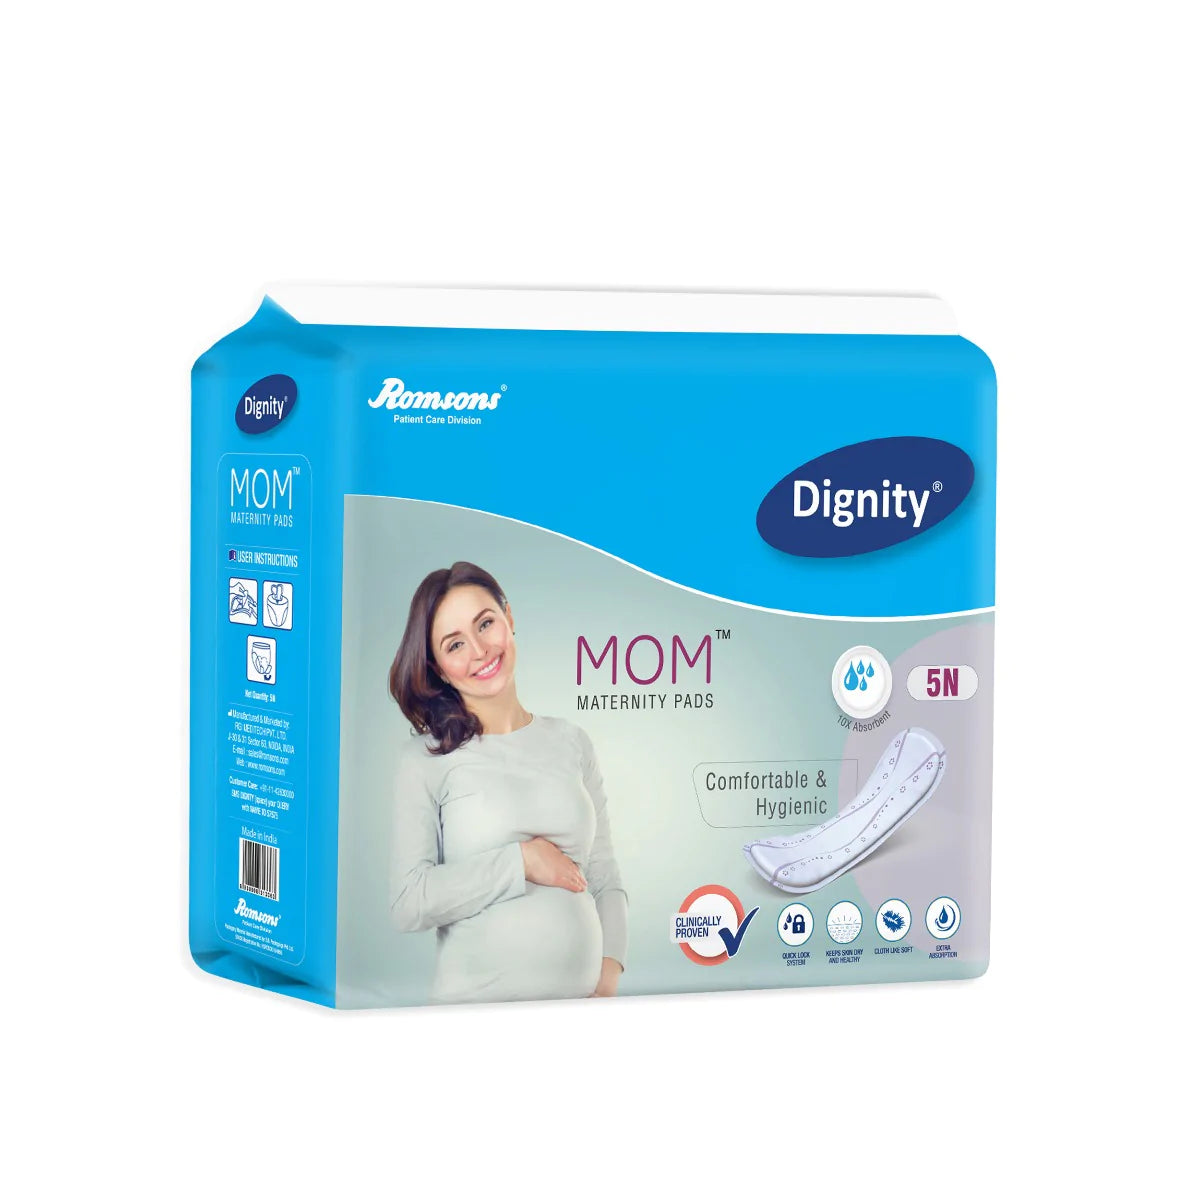 Dignity Mom Maternity Pads (5 Pcs/Pack)